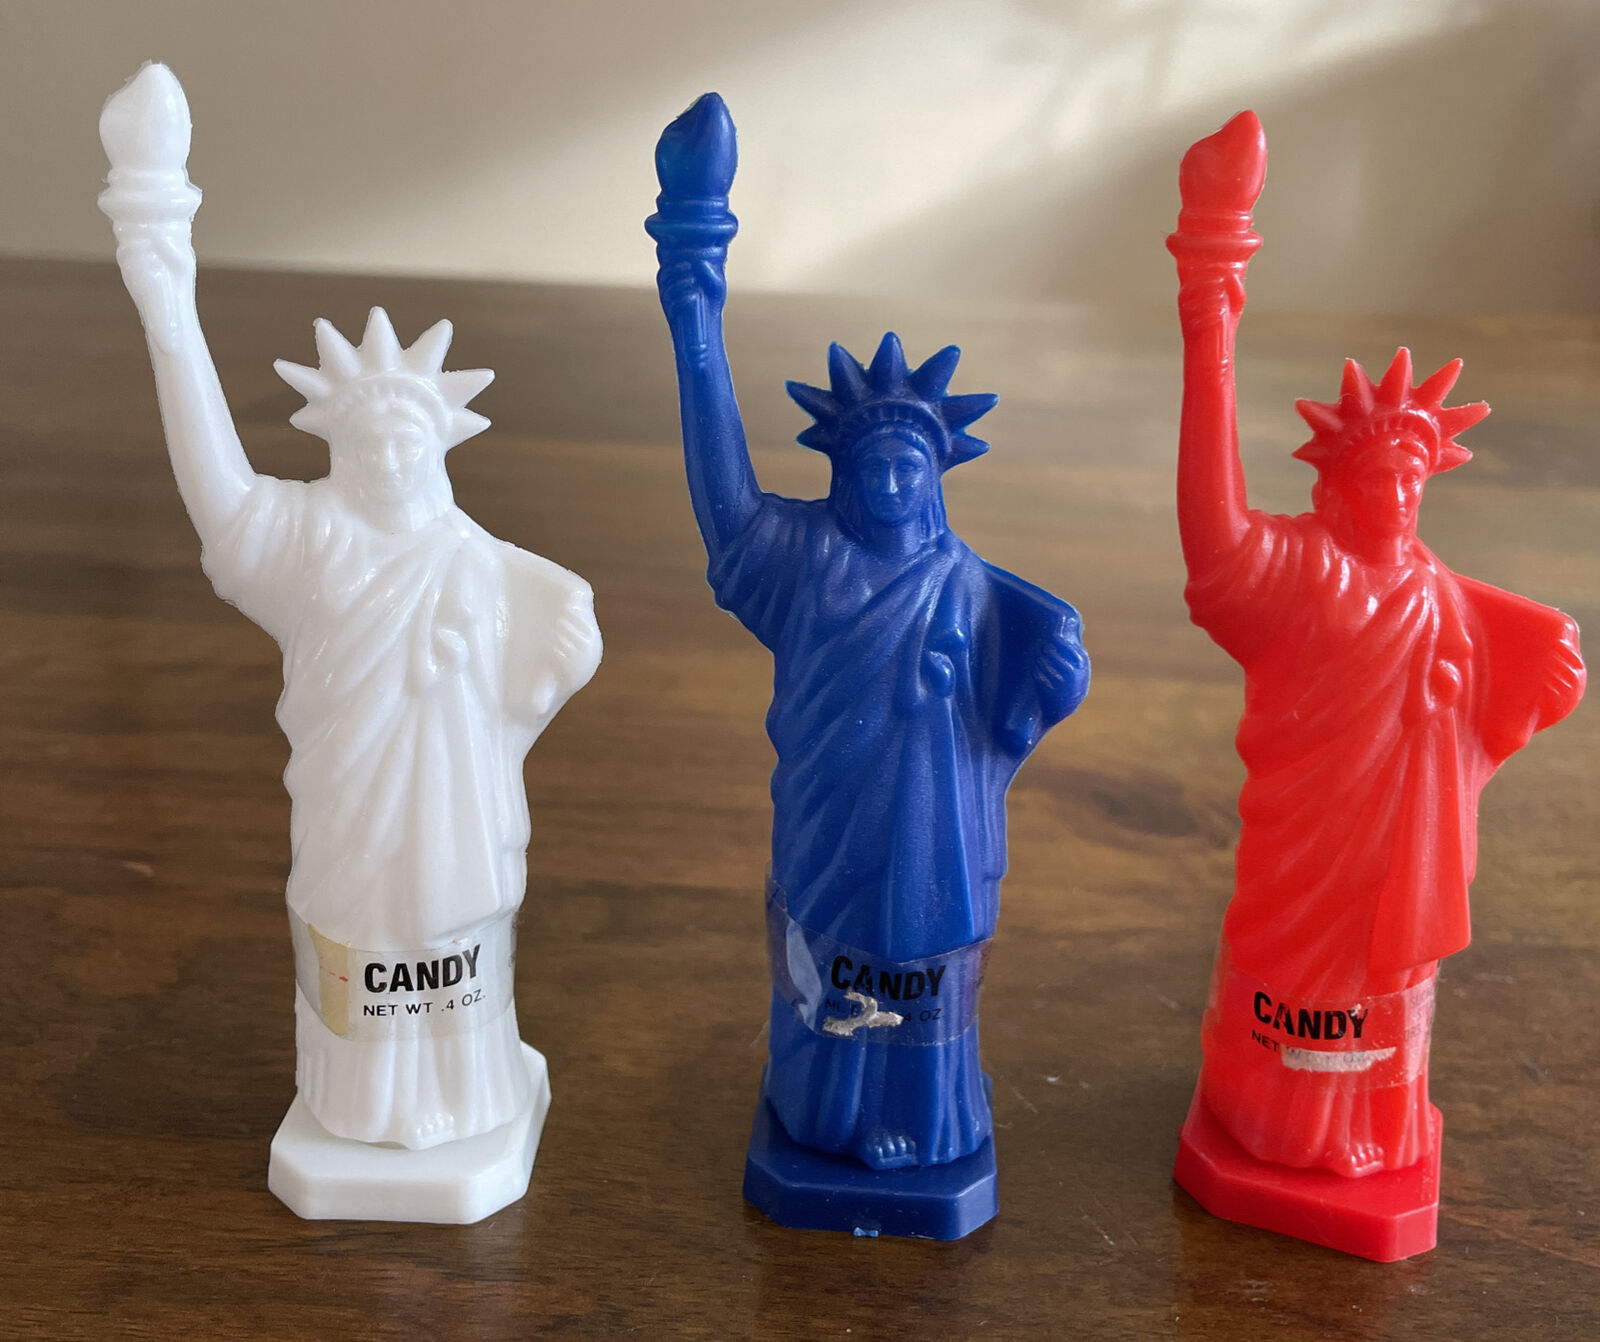 Set Of 3 RARE 1986 Vintage Topps STATUE OF LIBERTY Candy Container Figure Toy